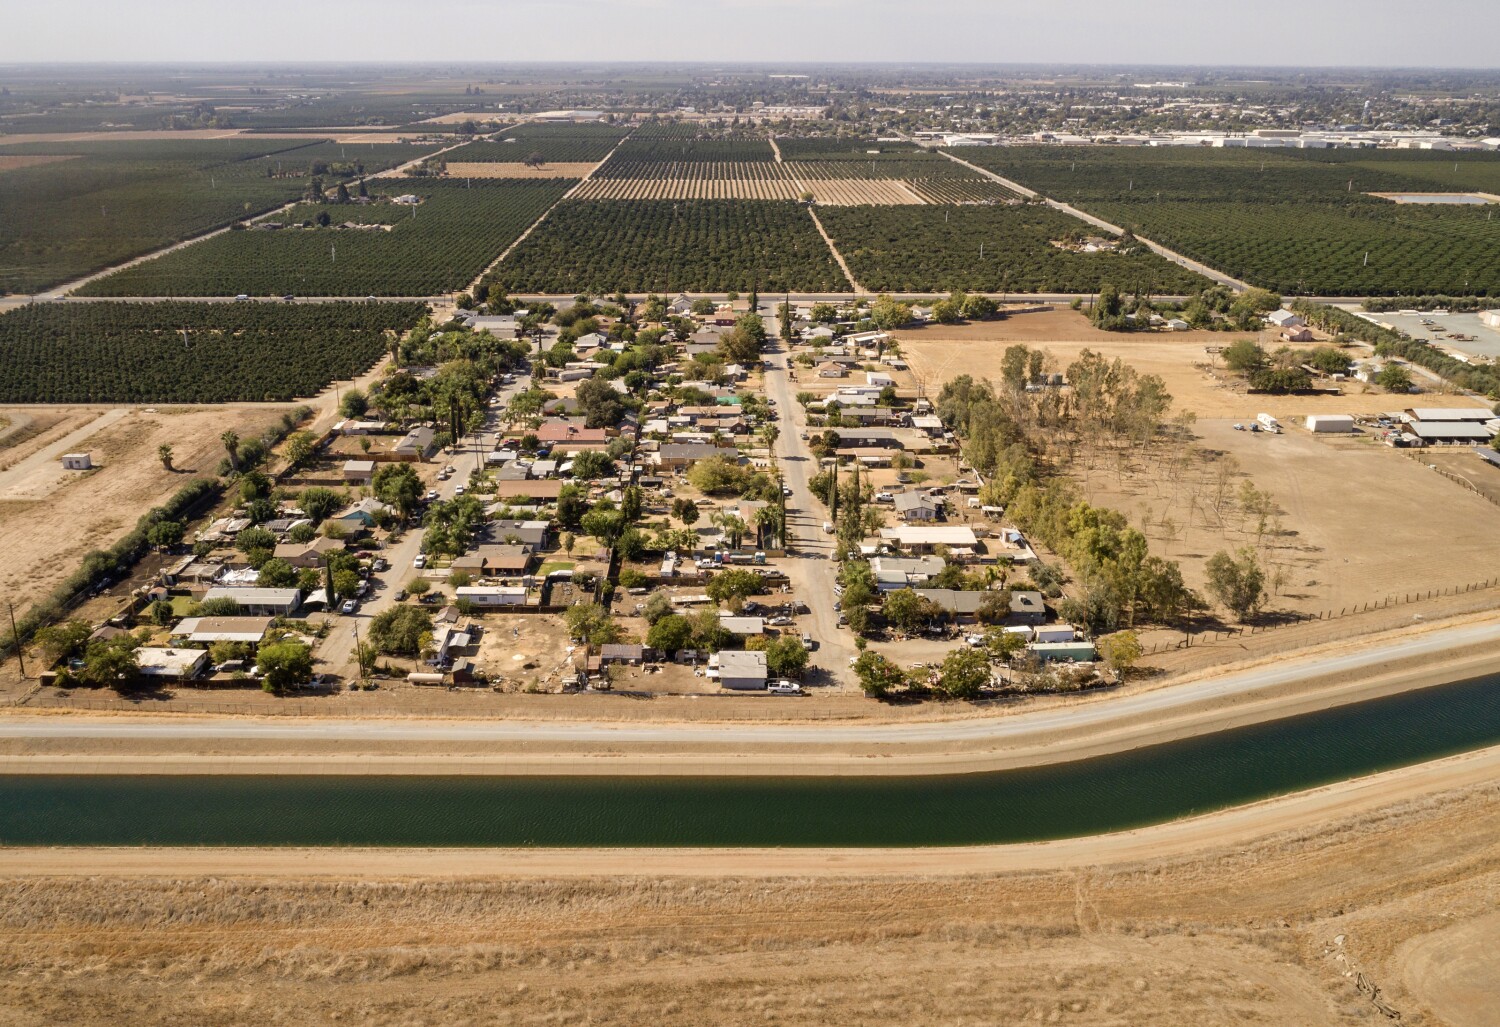 A California town refused to help its neighbors with water. So the state stepped in.